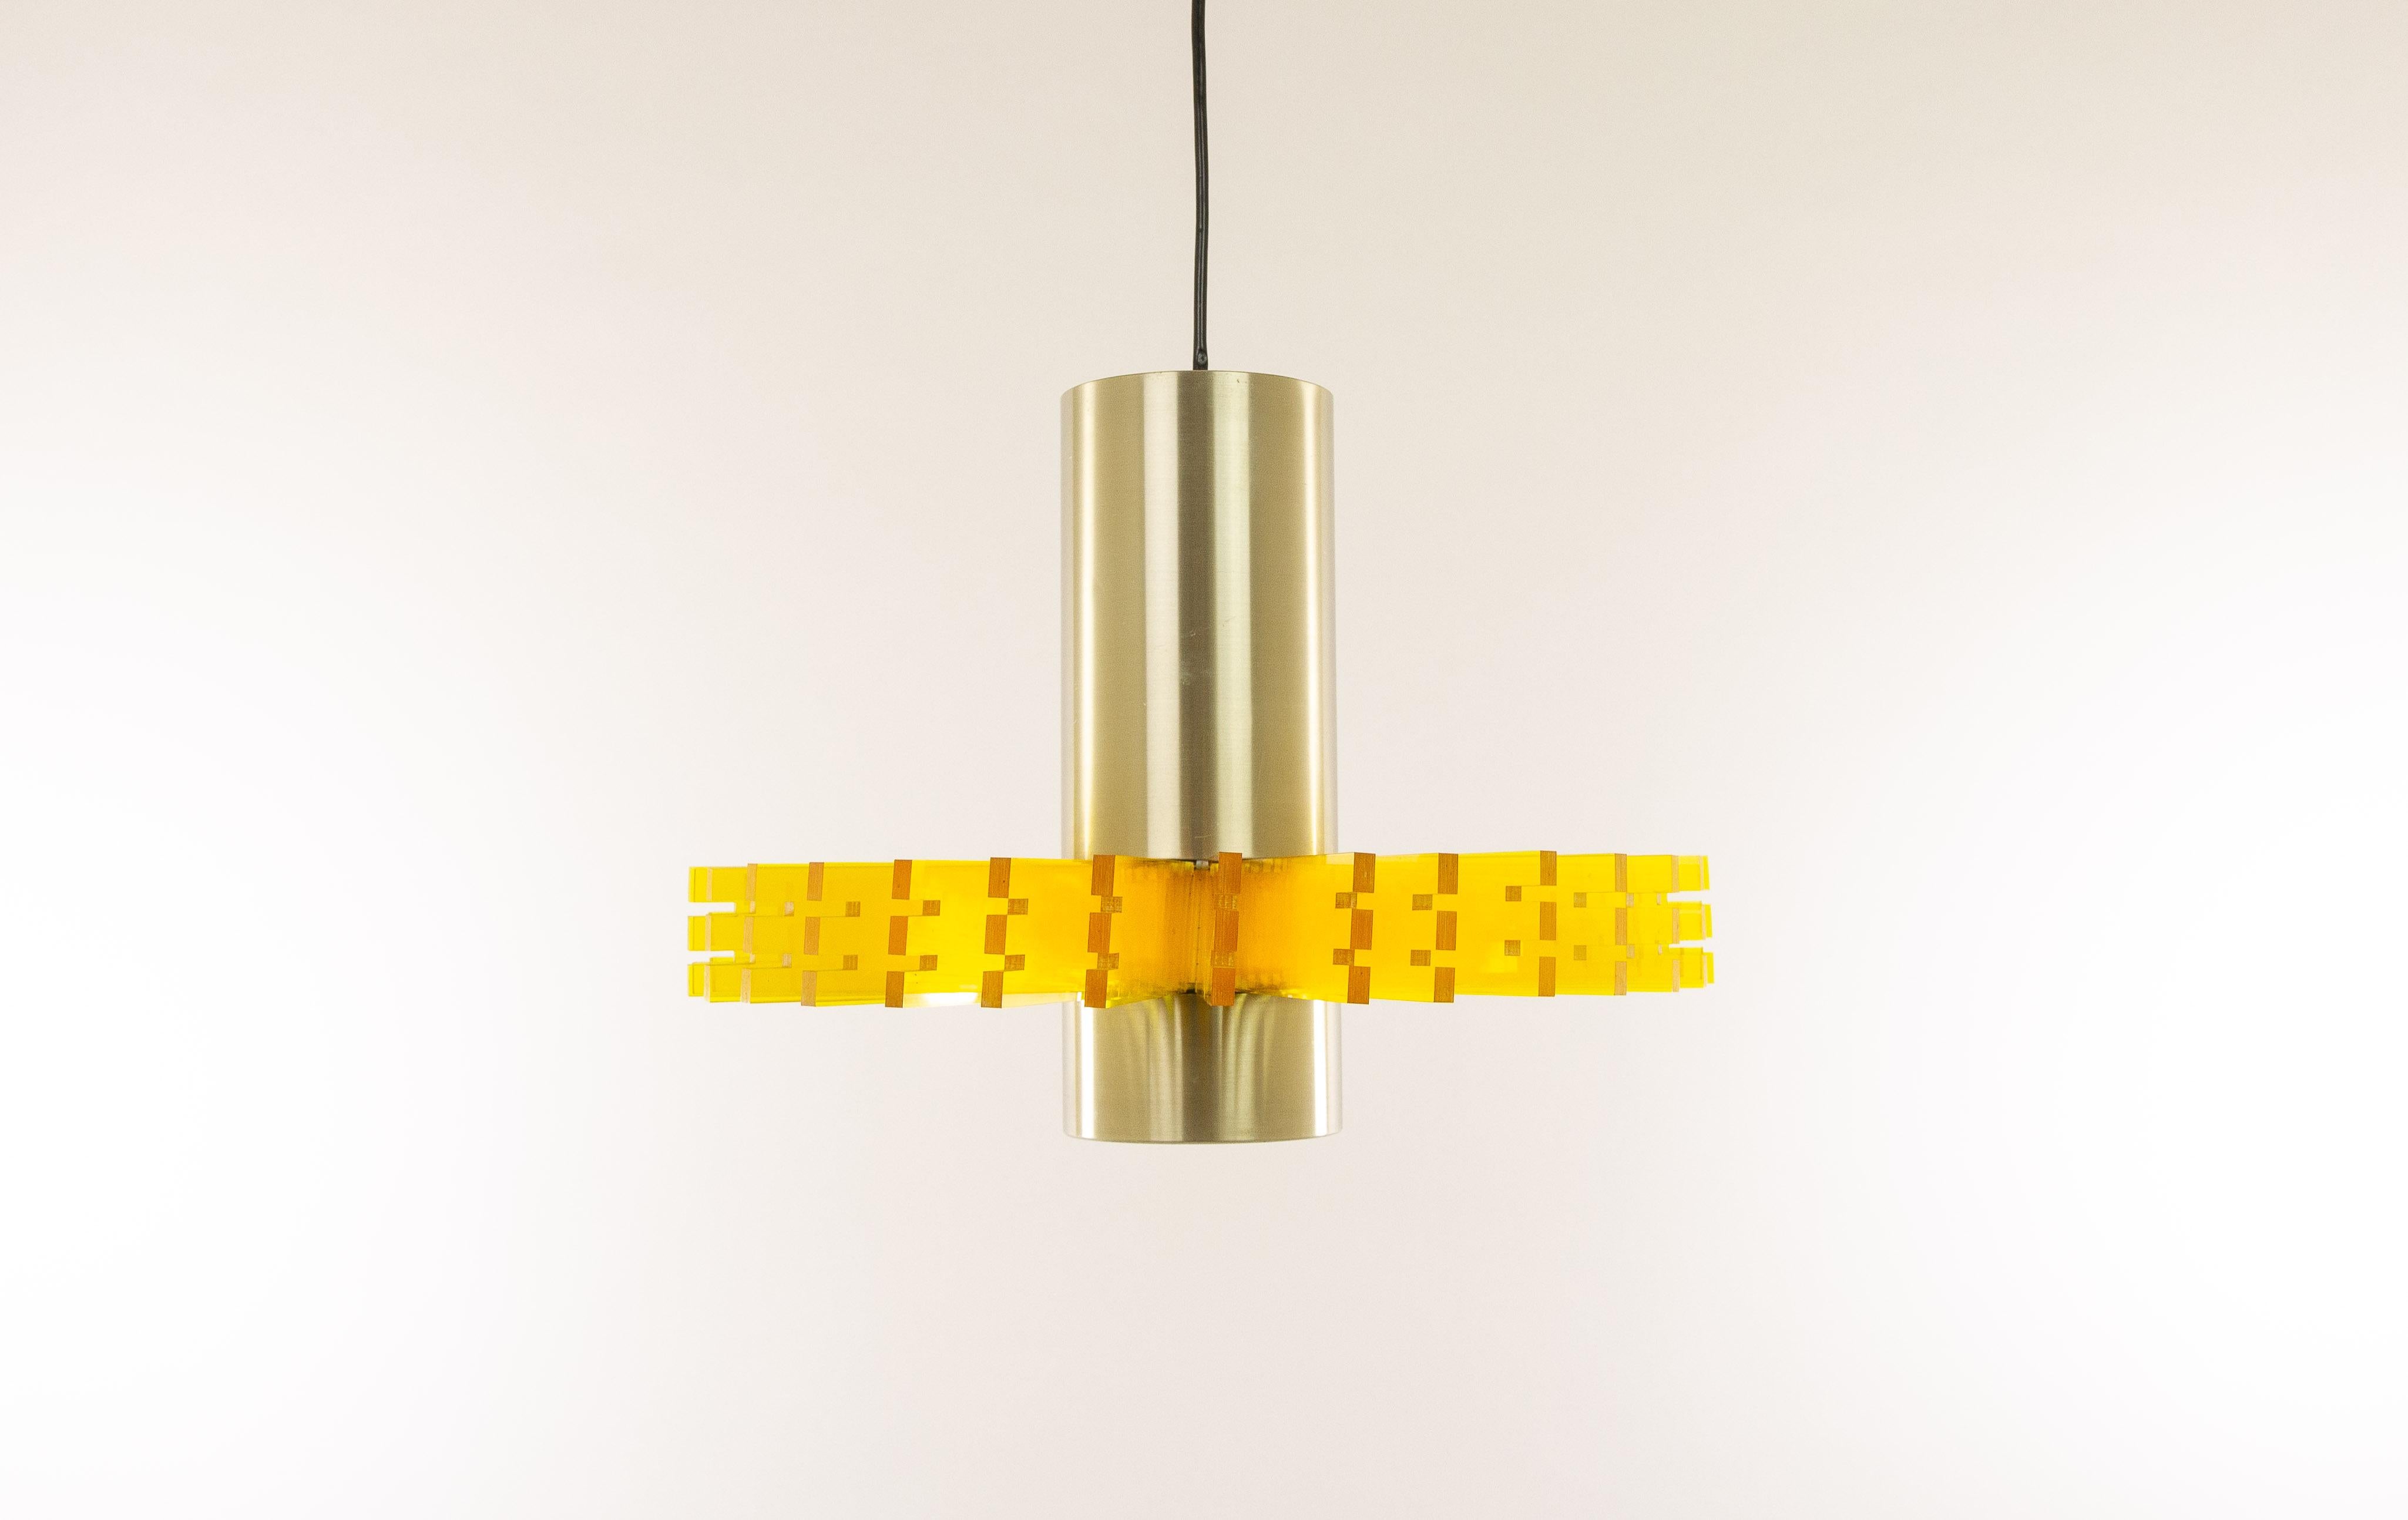 Aluminum Yellow 'Priest Collar' Pendant by Claus Bolby for Cebo Industri, 1960s